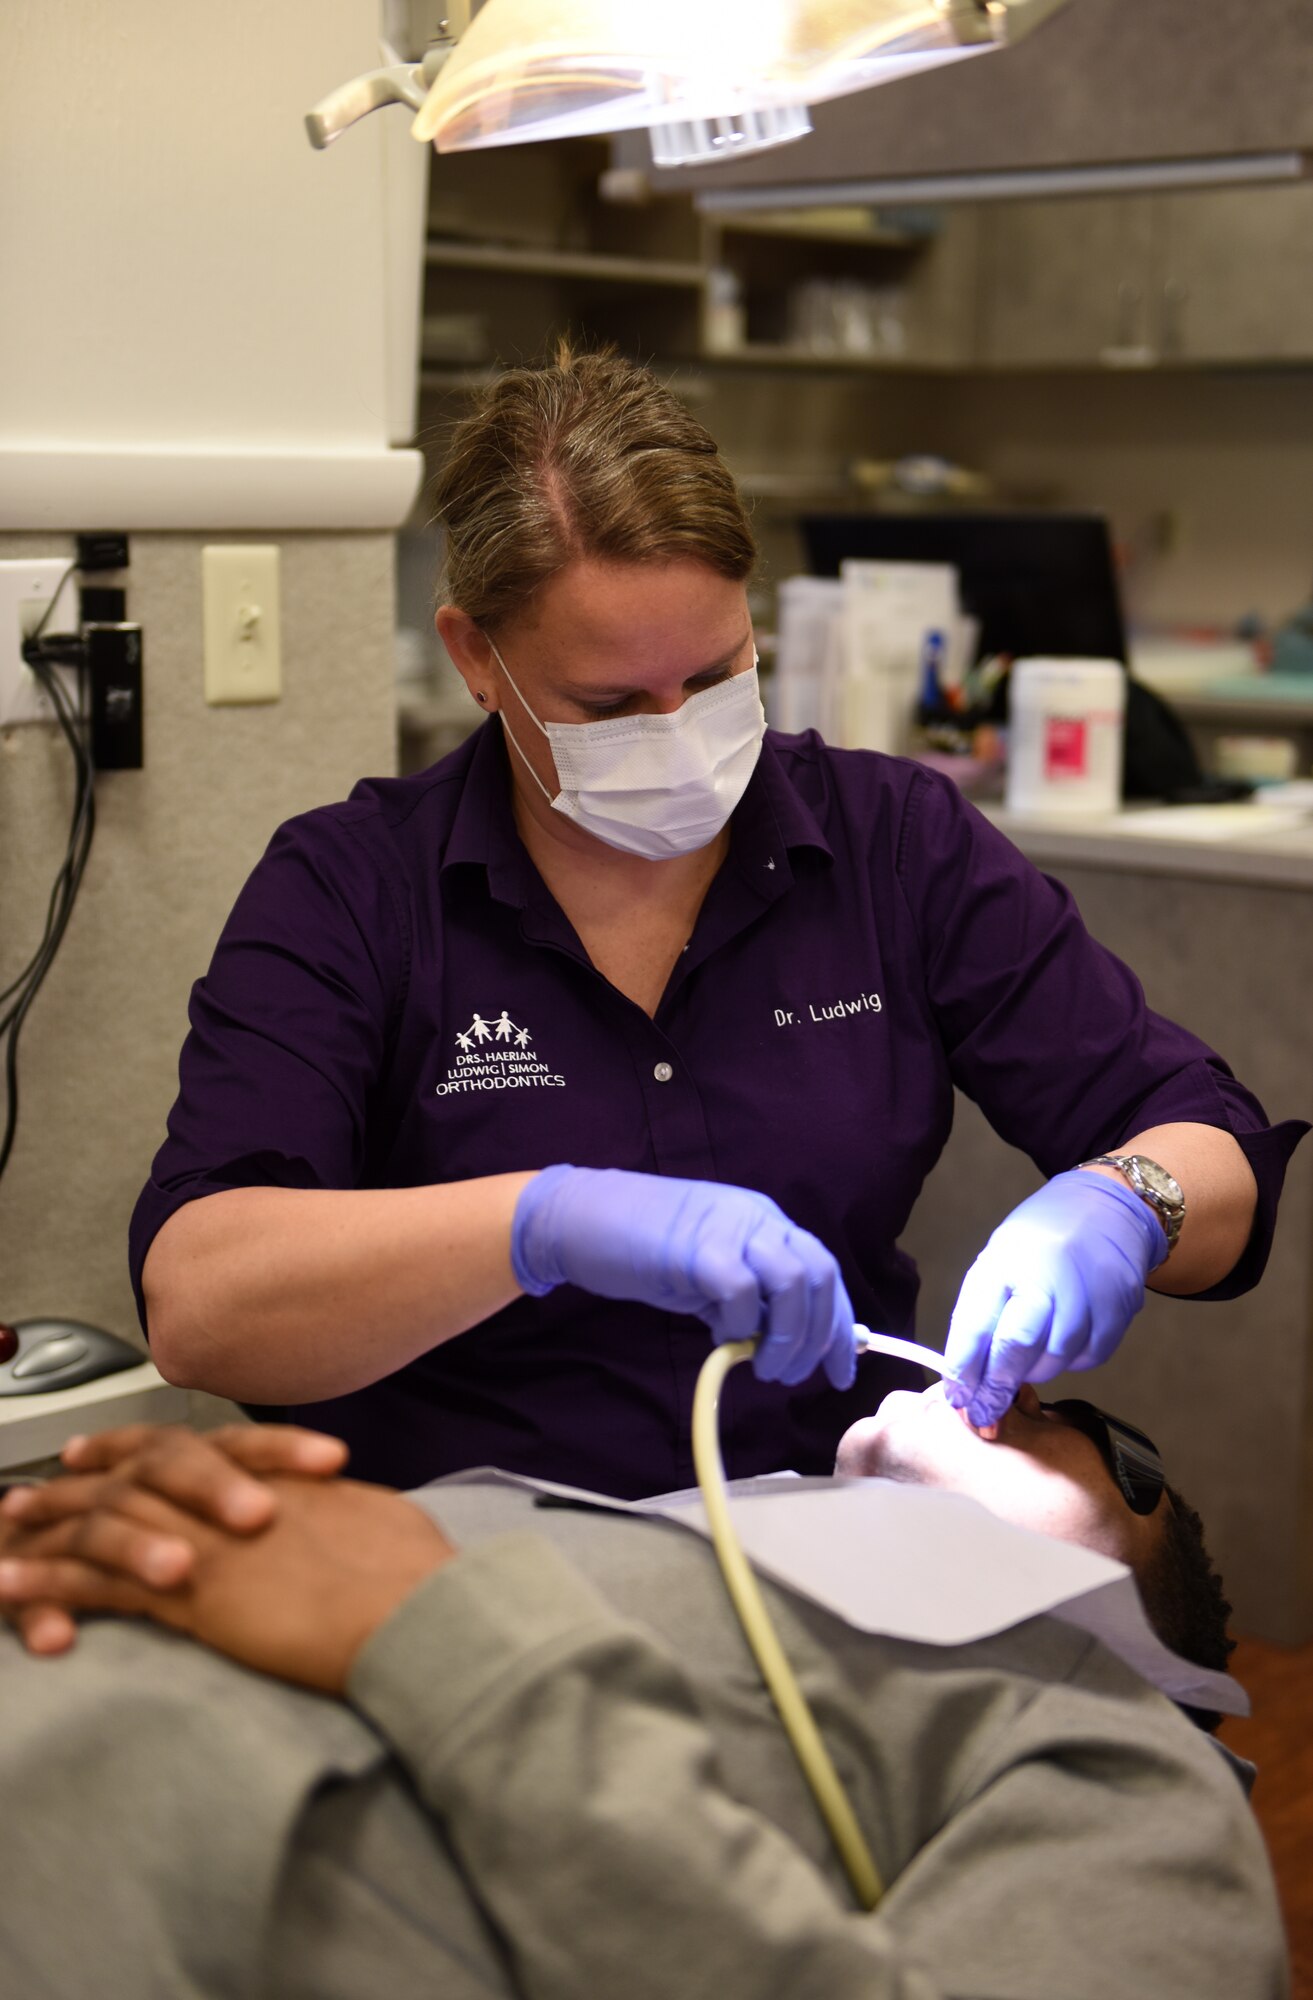 Military Dentists: A Full-Filling Career Choice